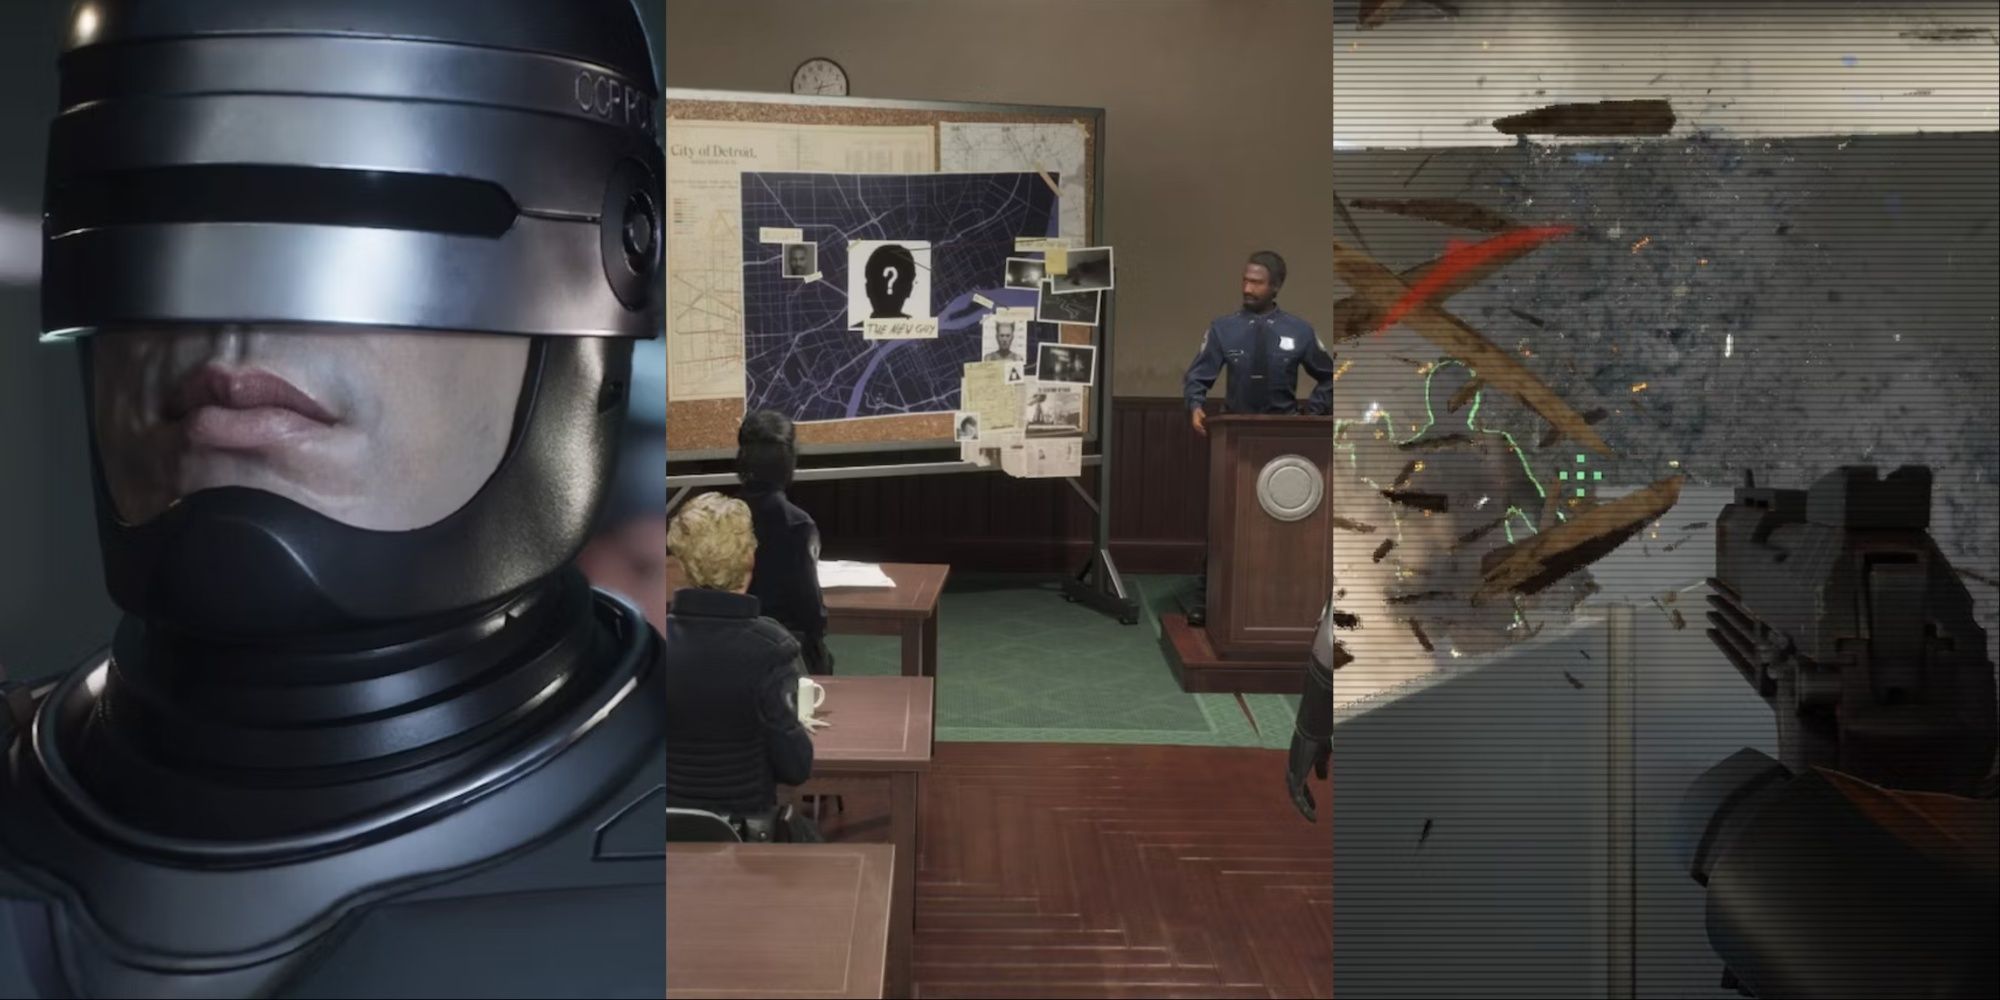 A collage showing a close shot of Robocop's face, a briefing room with police officers, and a gun shooting at someone.